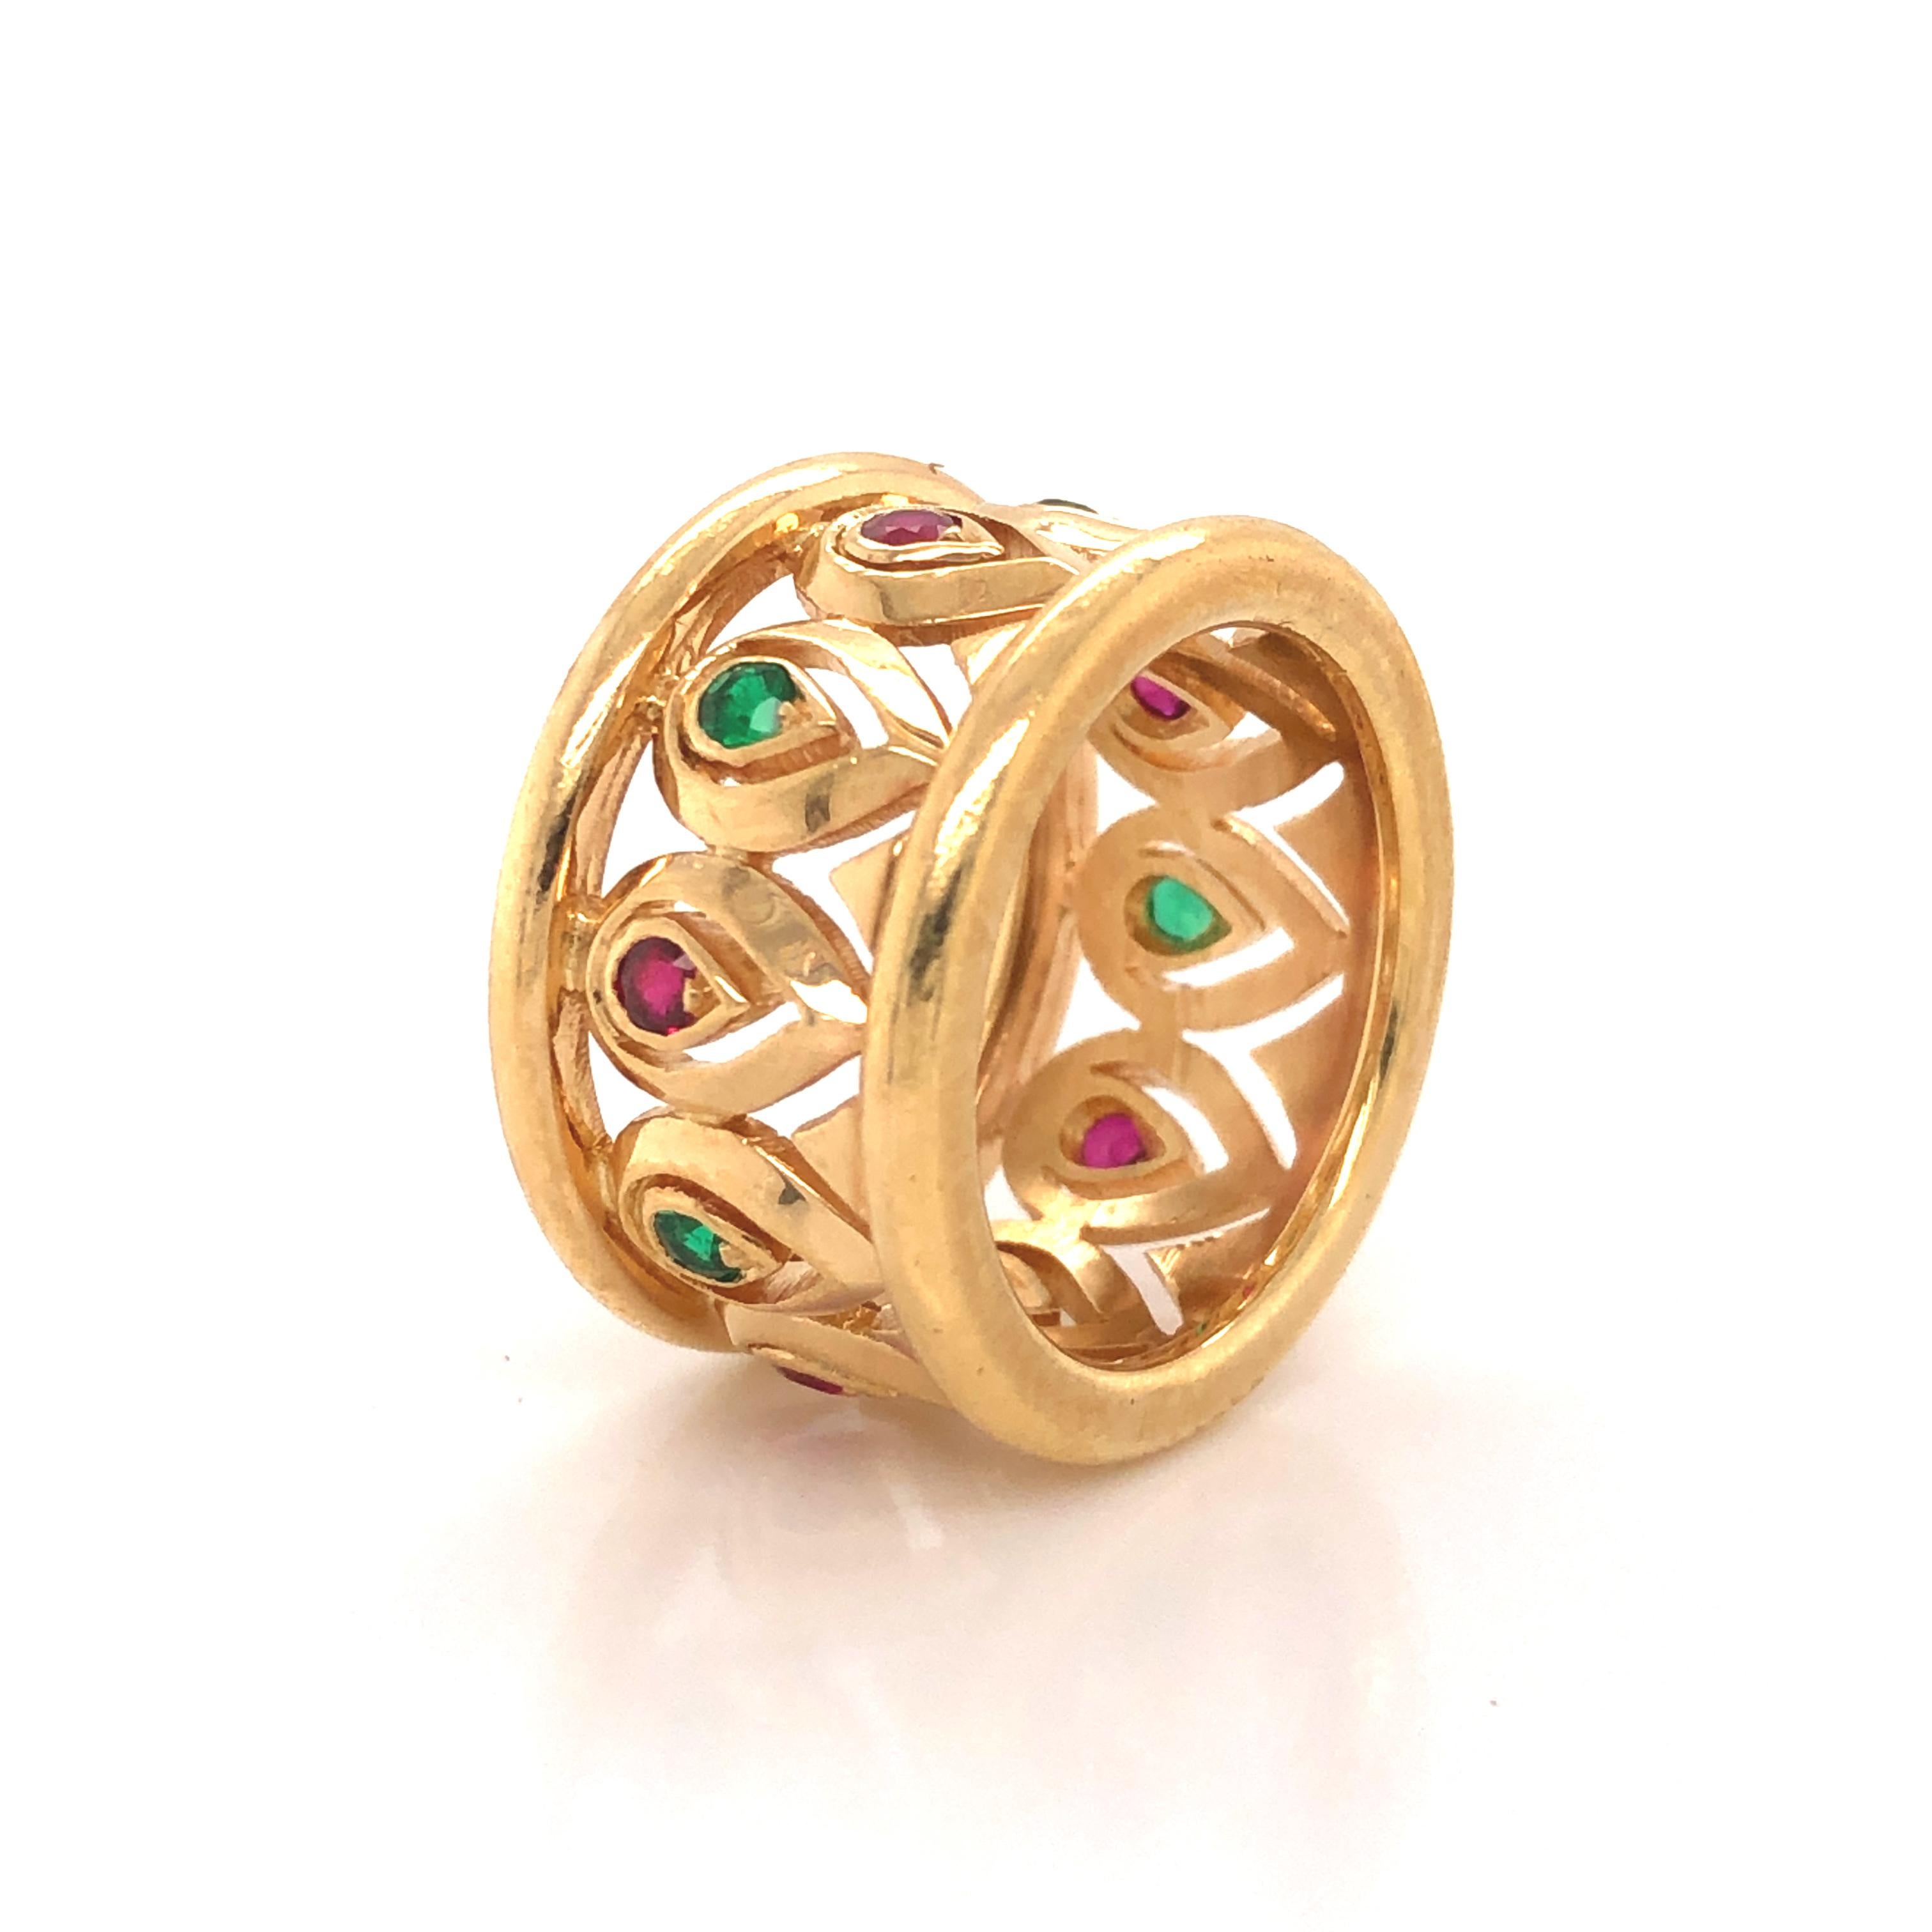 Beautiful wide band ring from Cartier. This elegant ring shows an amazing open work design crafted in 18k yellow gold. Set in a beautiful alternating pattern are natural ruby and emerald gemstones.  The workmanship on this ring is truly exceptional,